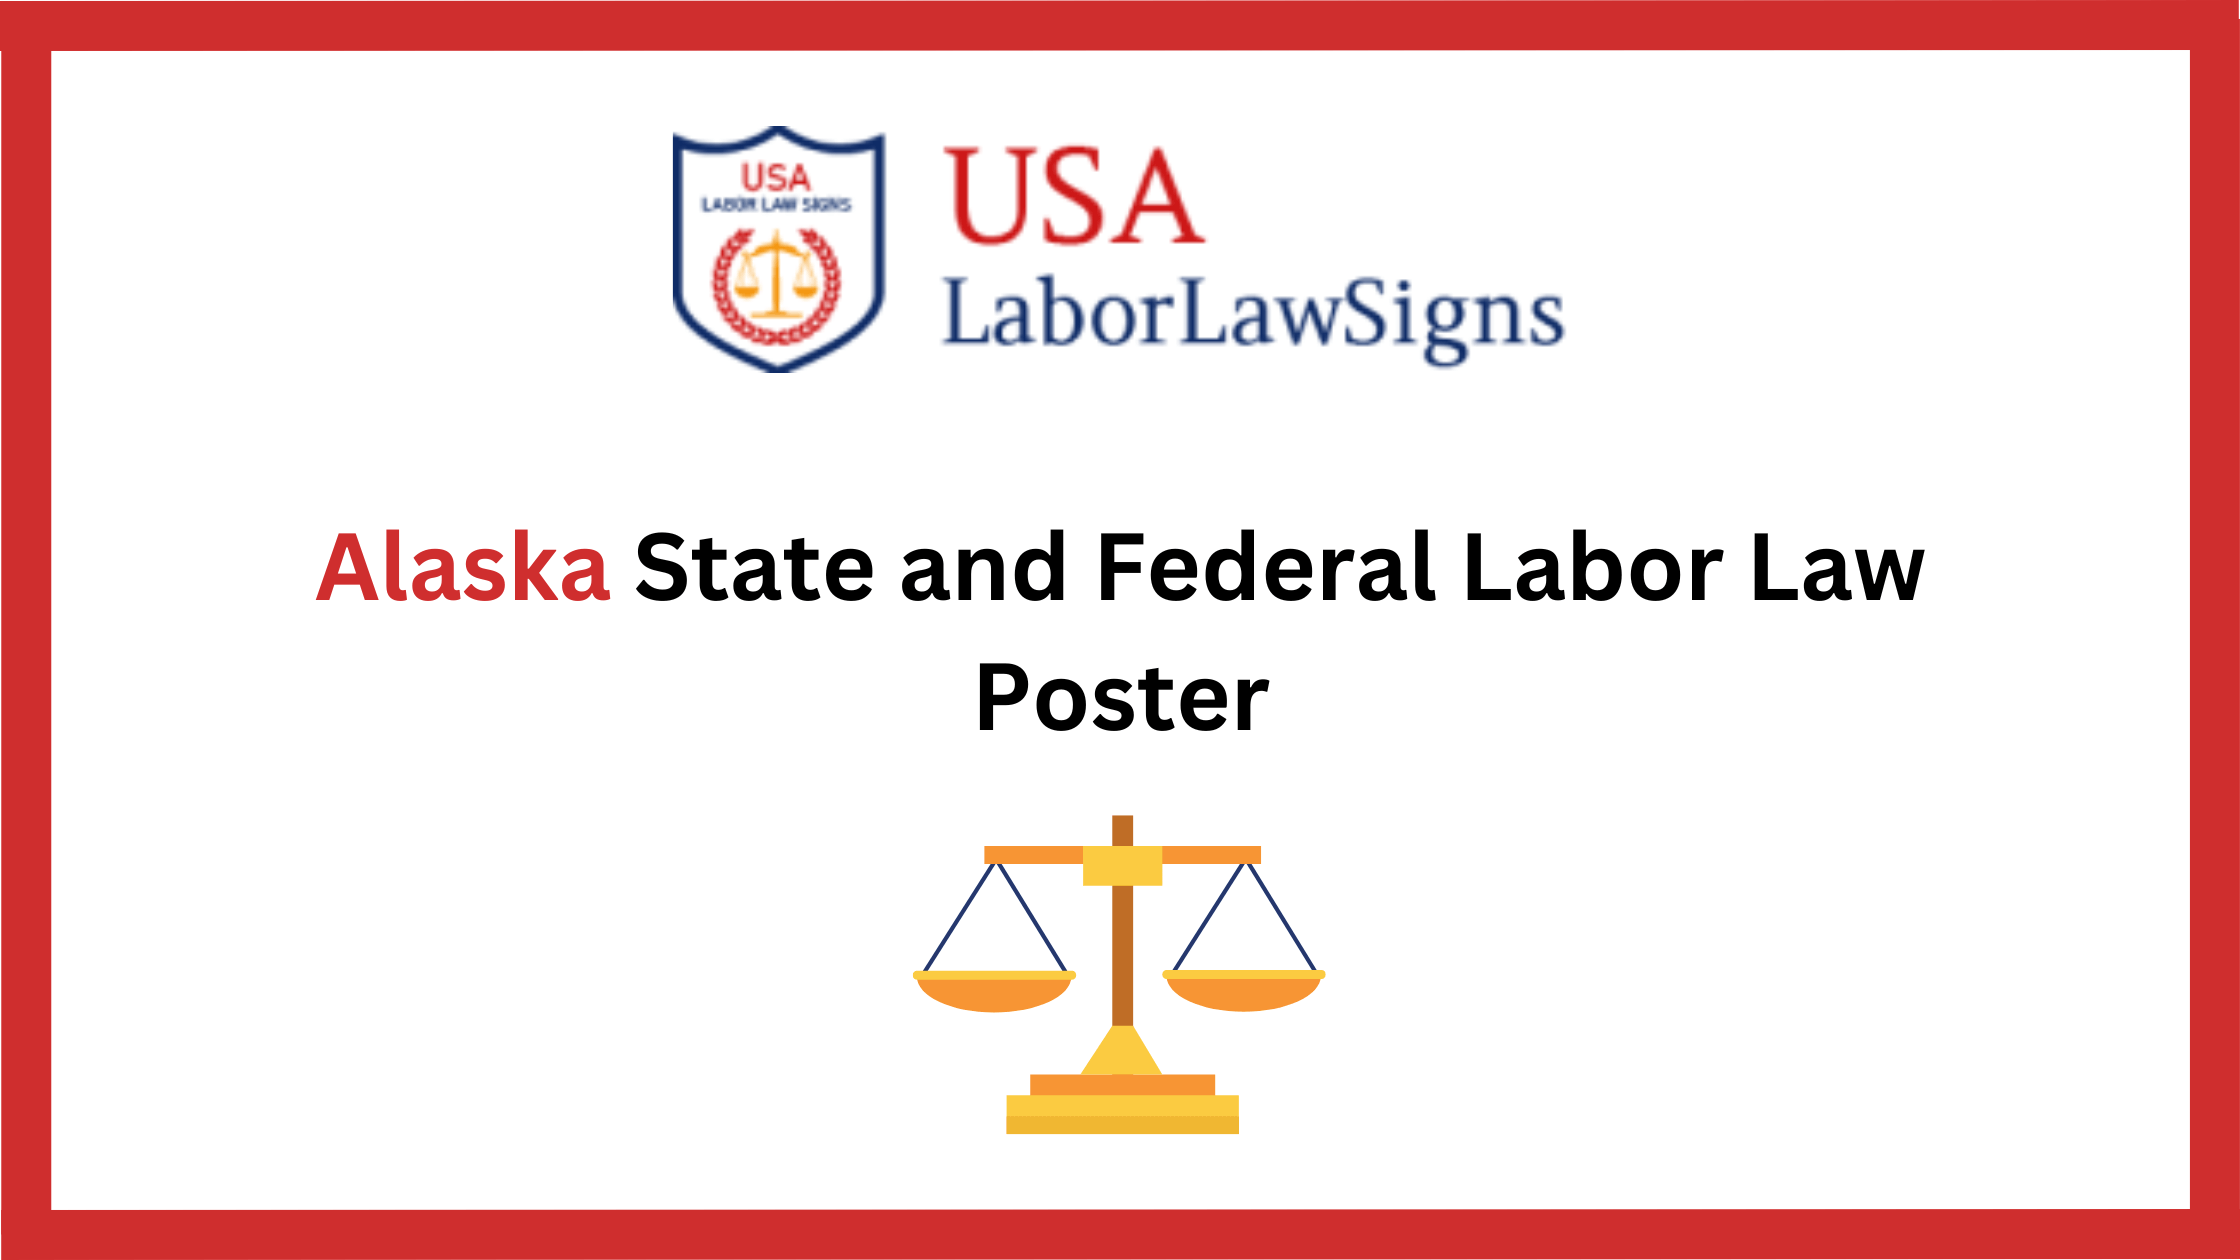 Alaska State and Federal Labor Law Poster